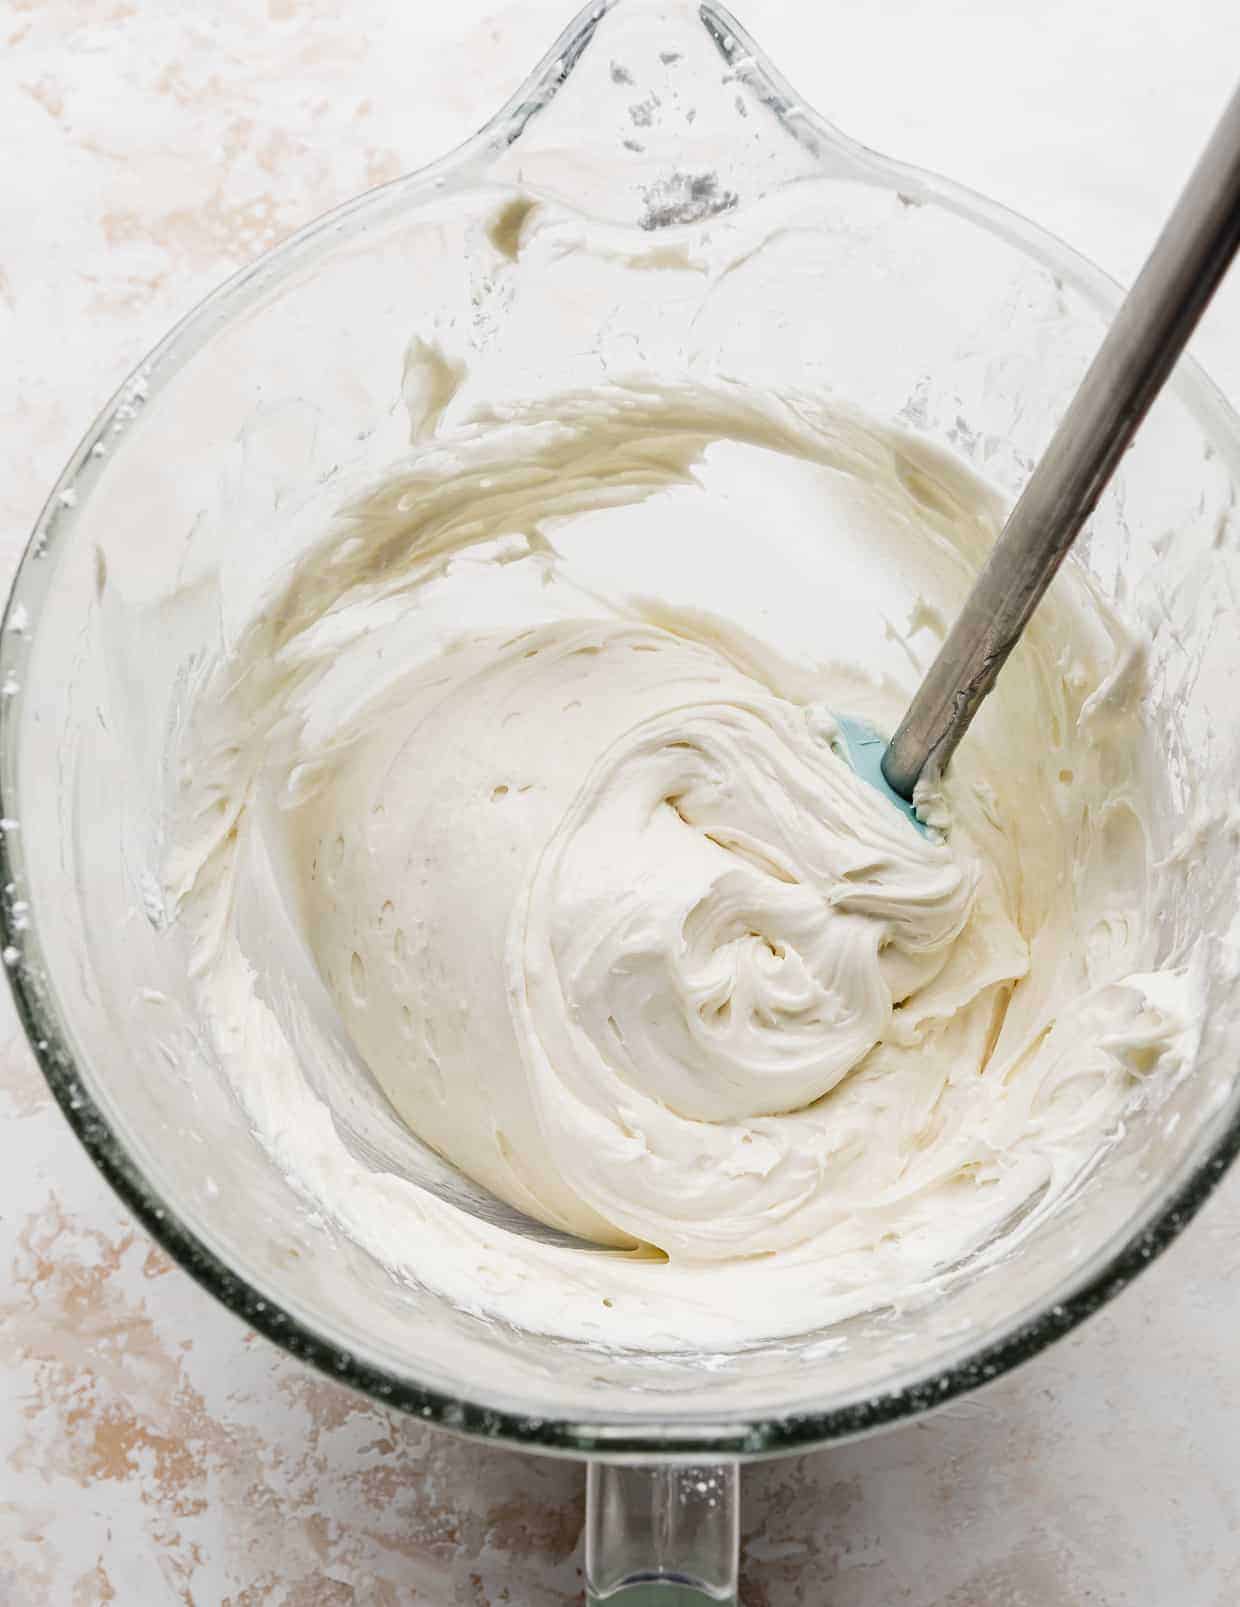 Vanilla cake frosting in a glass mixing bowl.